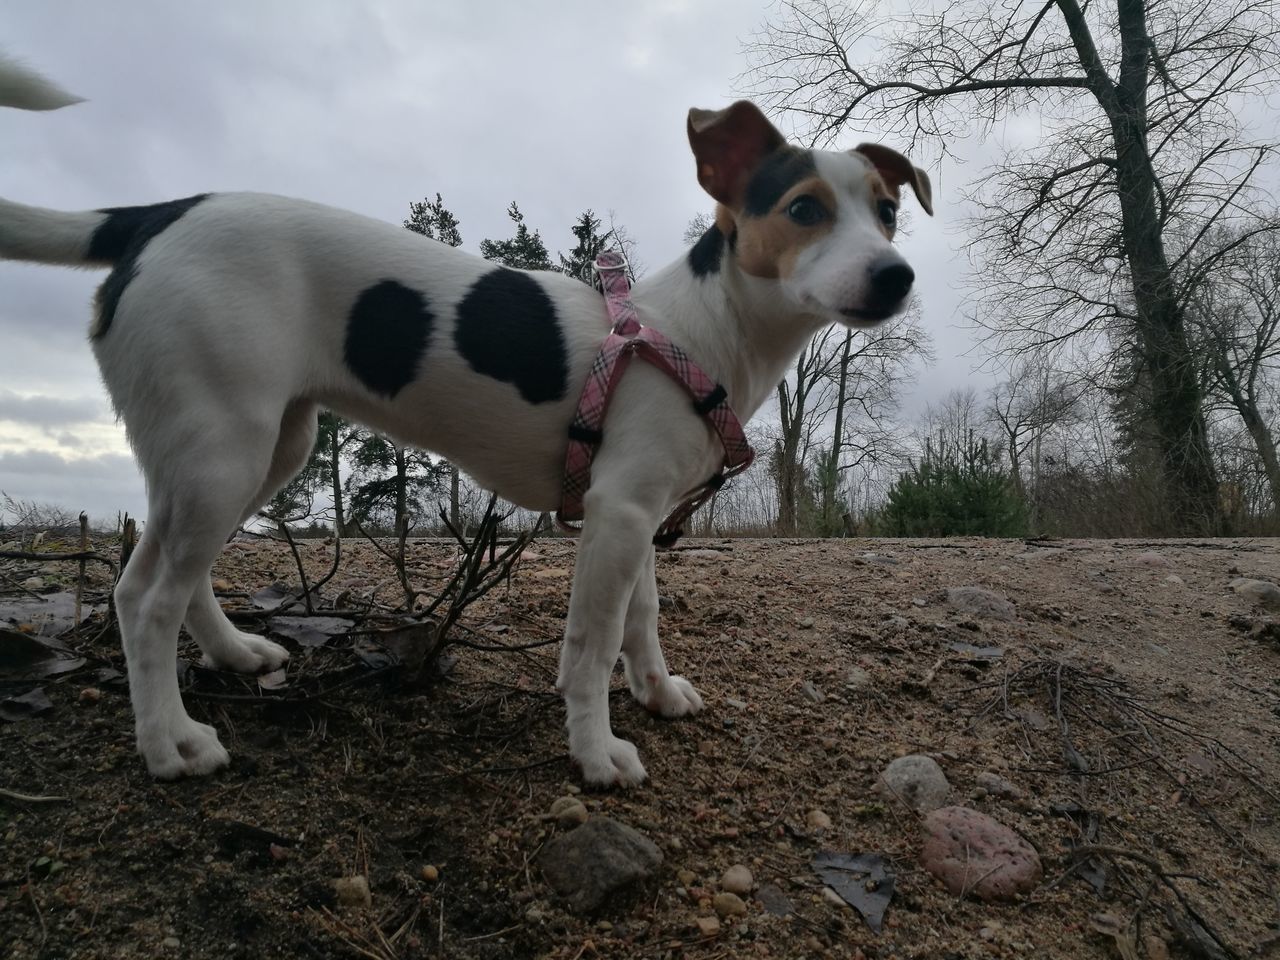 pets, dog, domestic animals, animal themes, mammal, one animal, sky, cloud - sky, no people, outdoors, day, nature, jack russell terrier